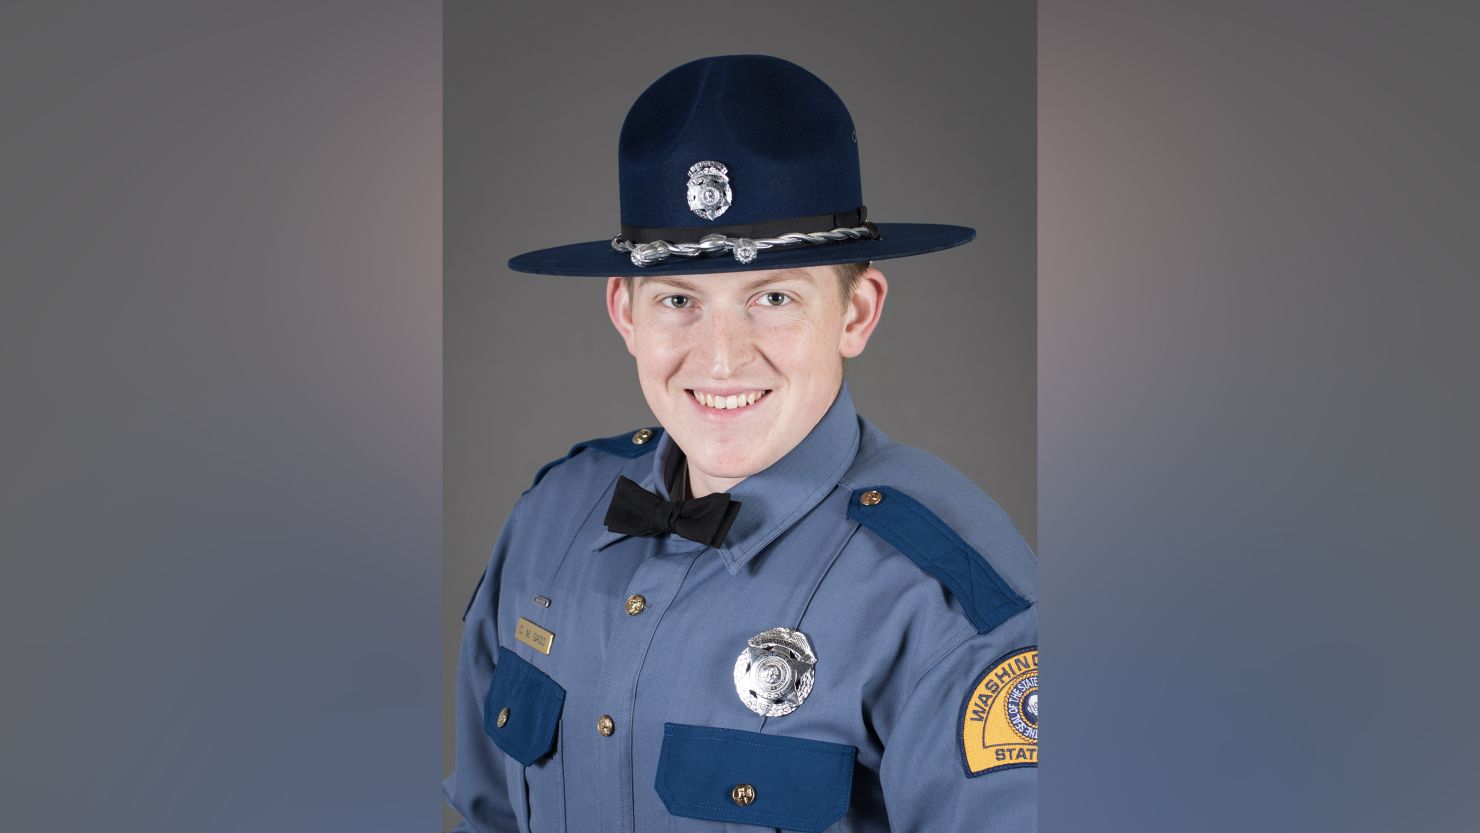 Washington State Patrol trooper Christopher Gadd was killed when he was struck by a motorist on Saturday, officials said.